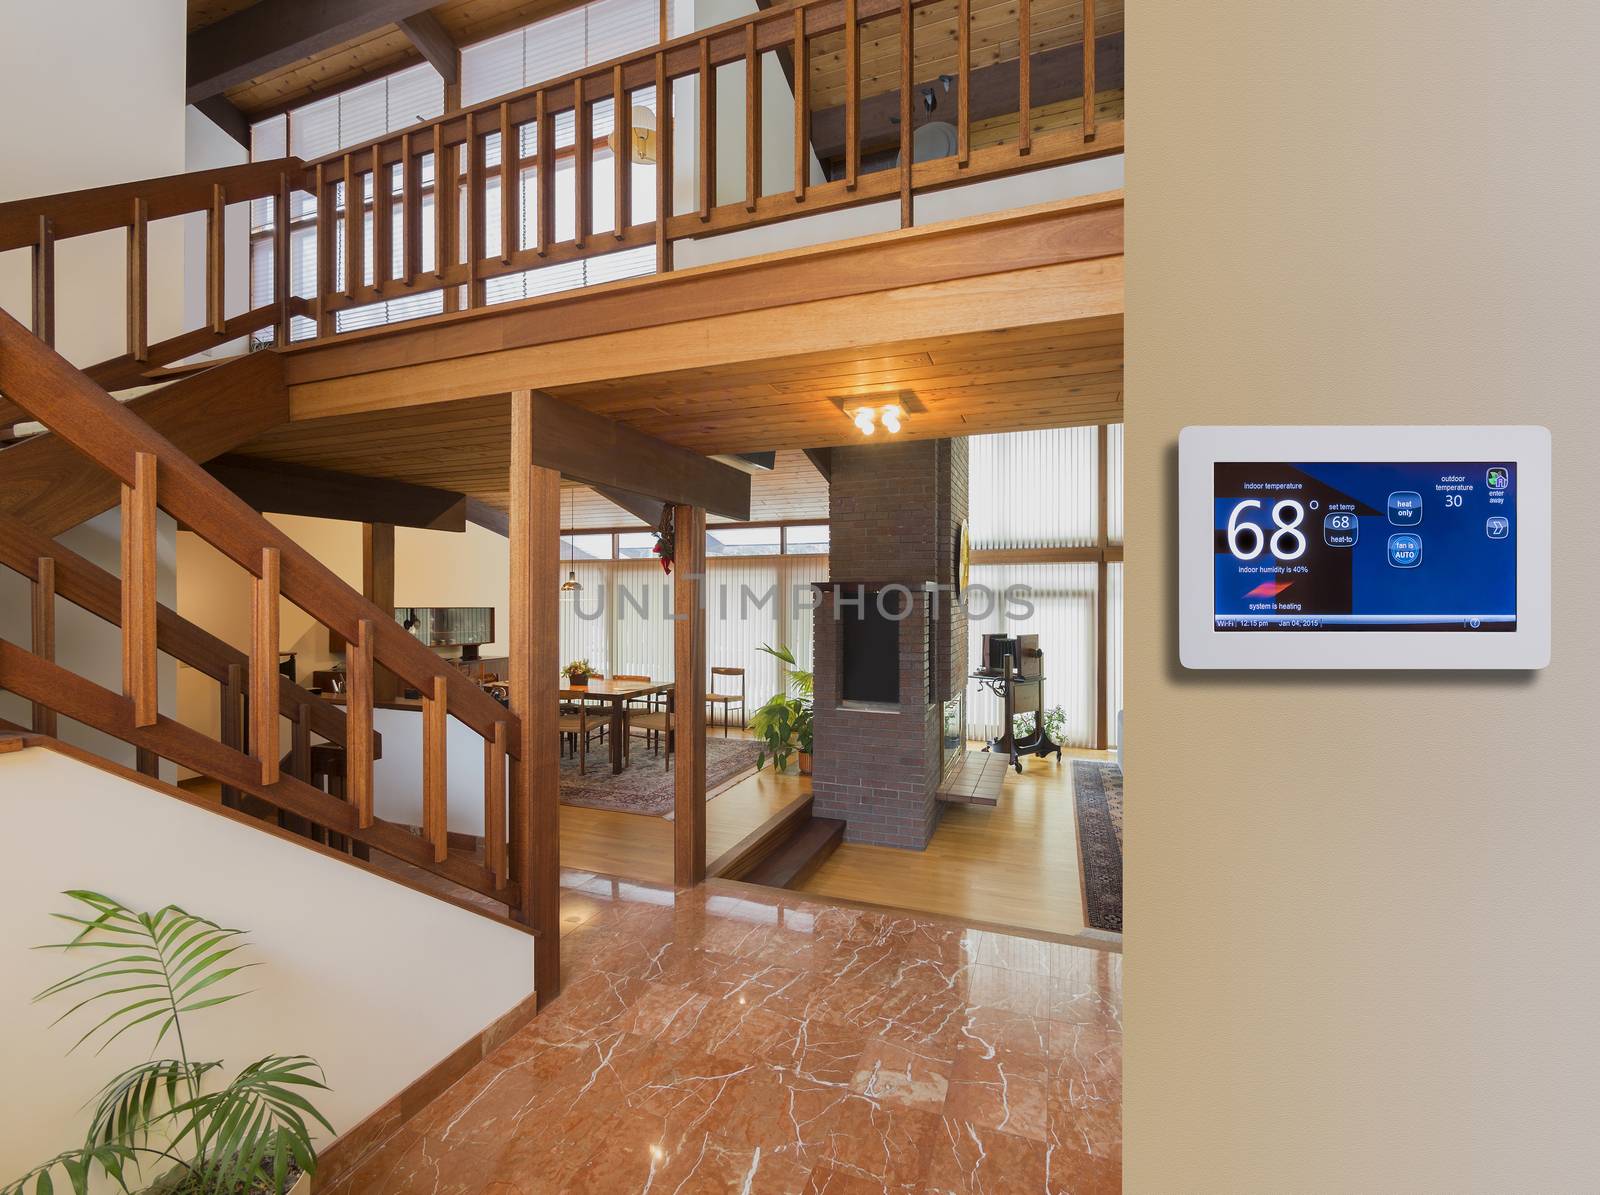 Programmable electronic thermostat for temperature control in living room